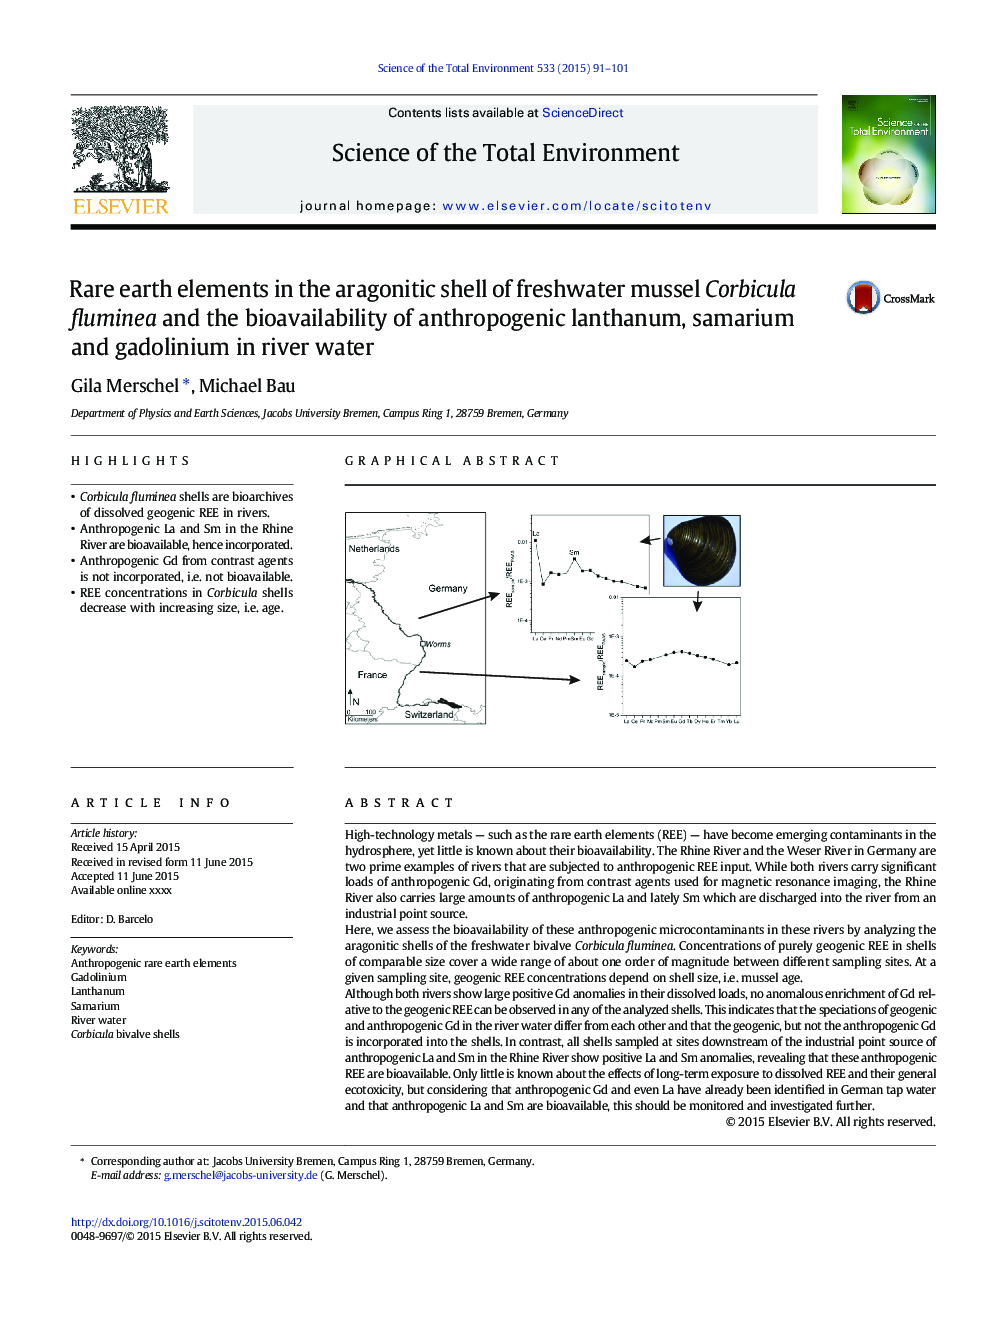 Rare earth elements in the aragonitic shell of freshwater mussel Corbicula fluminea and the bioavailability of anthropogenic lanthanum, samarium and gadolinium in river water